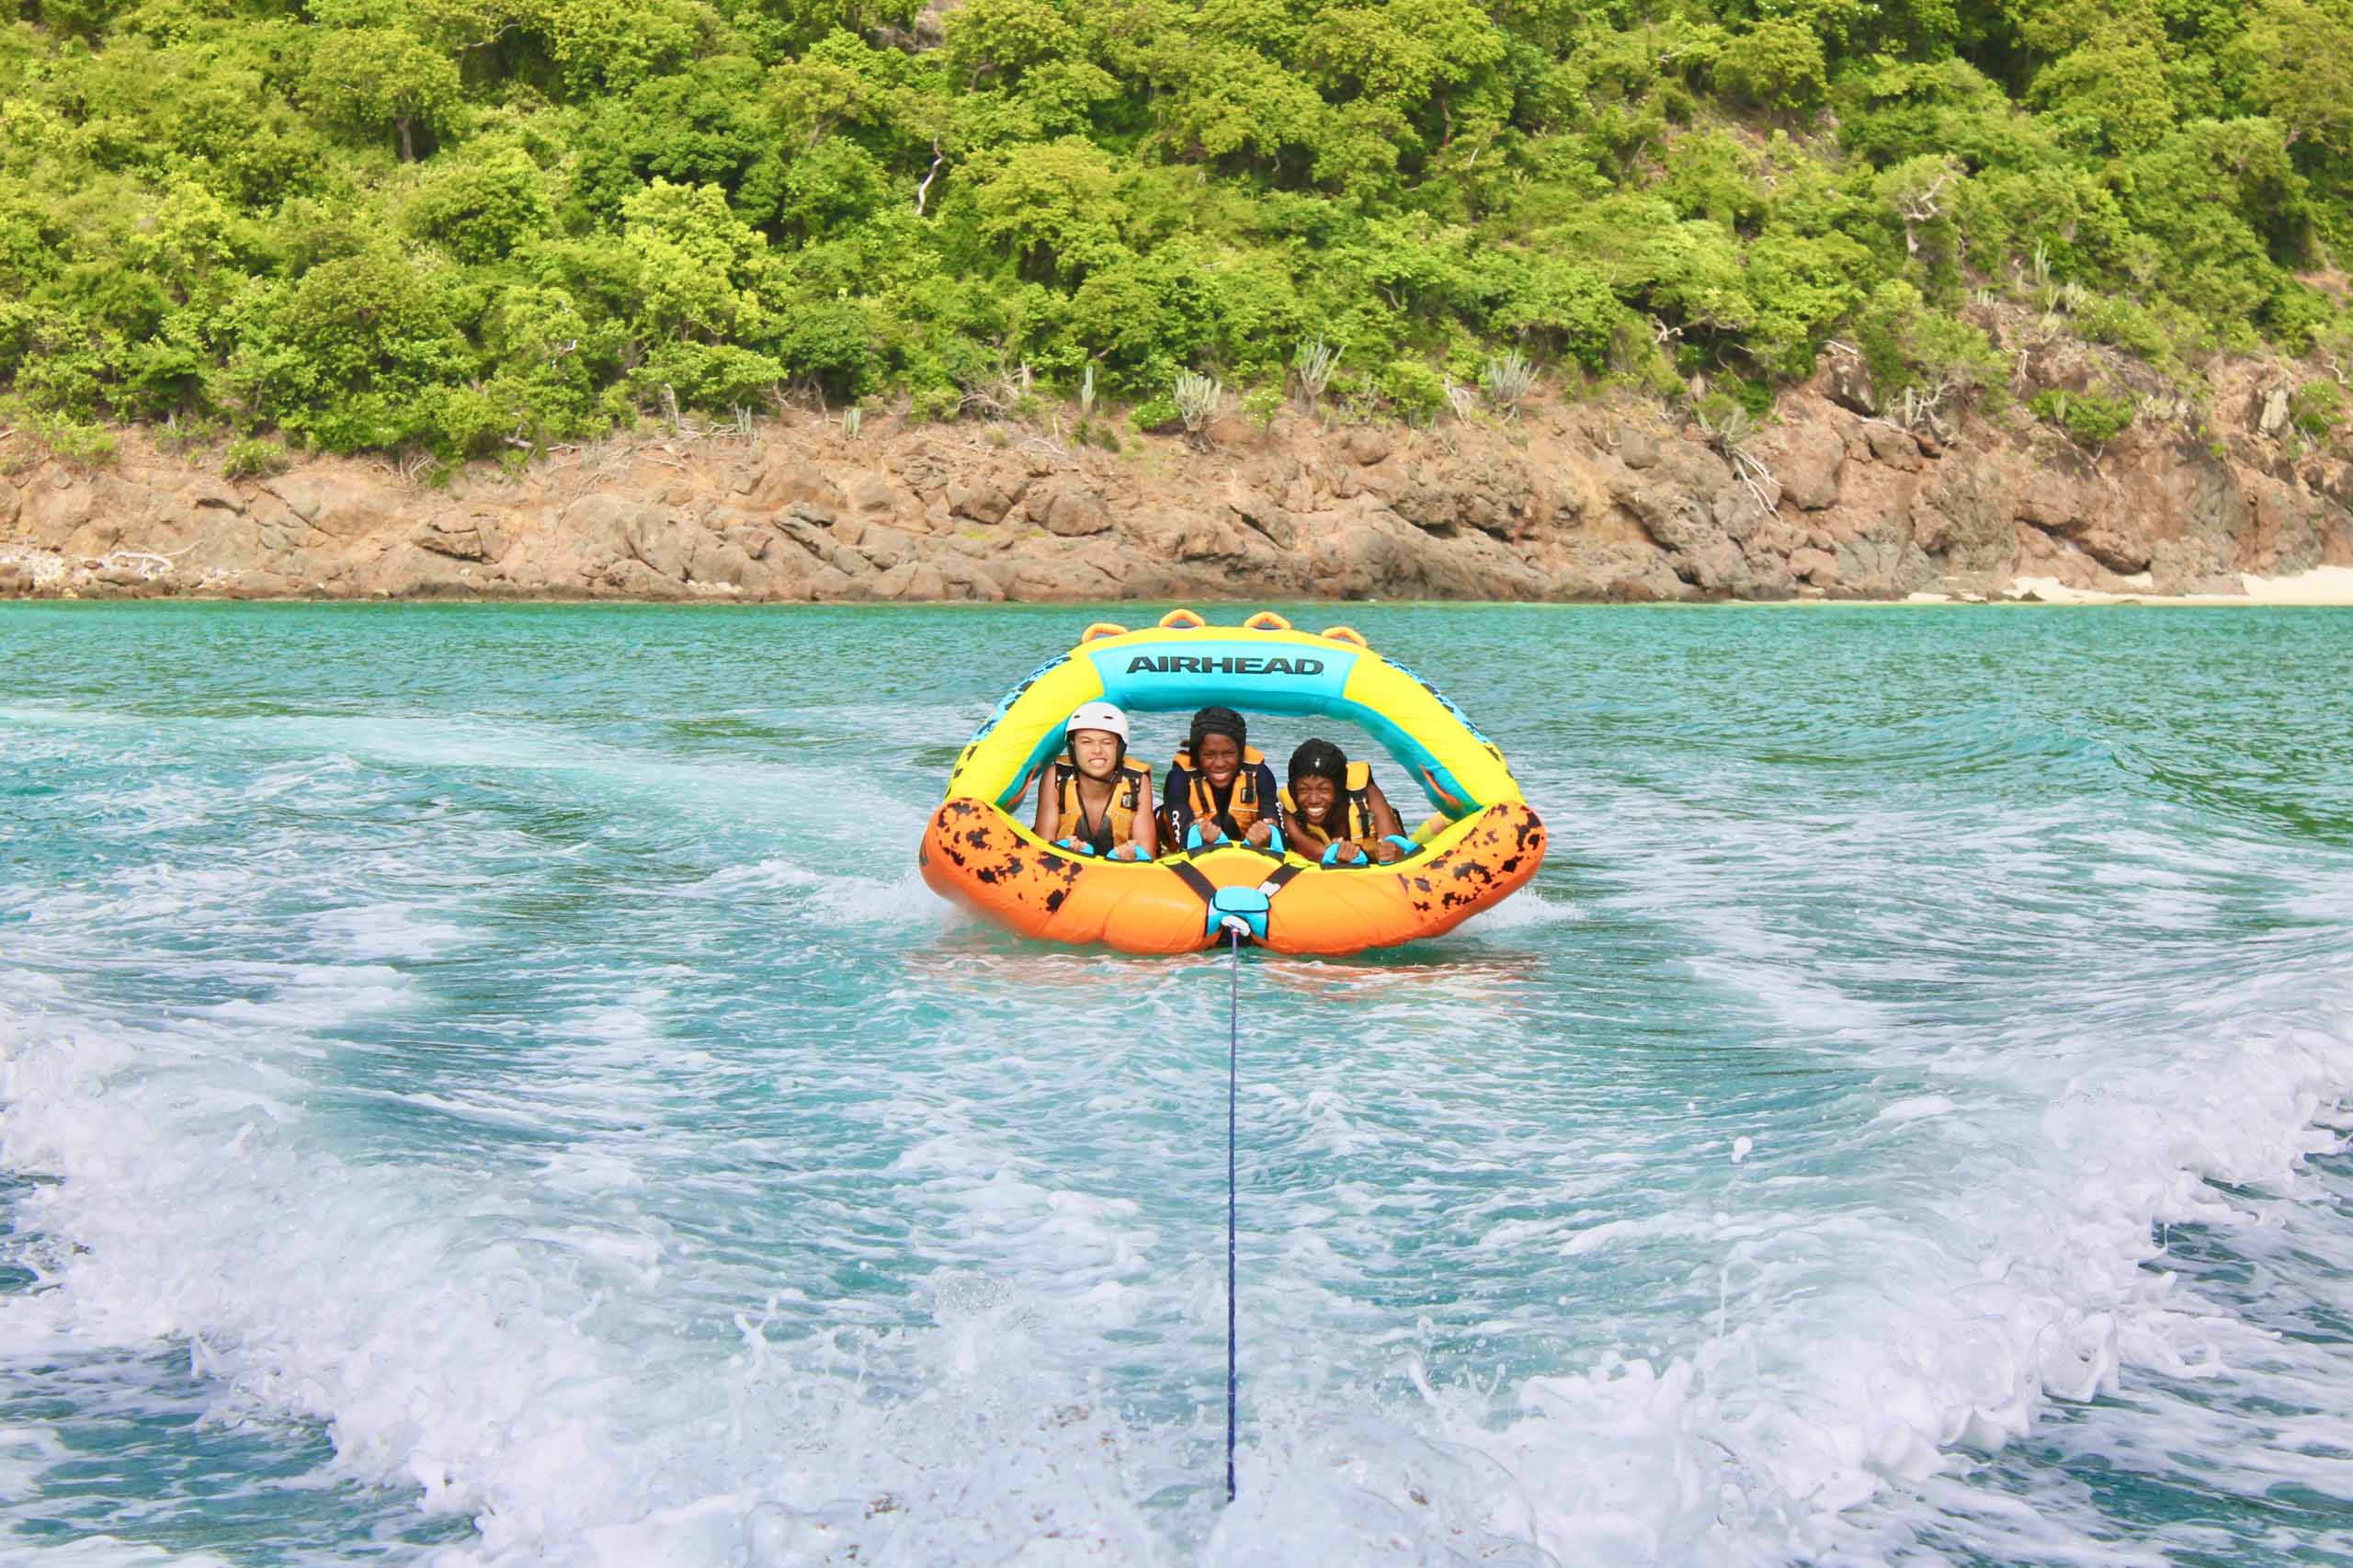 A group of people riding an inflatable boat in the water.